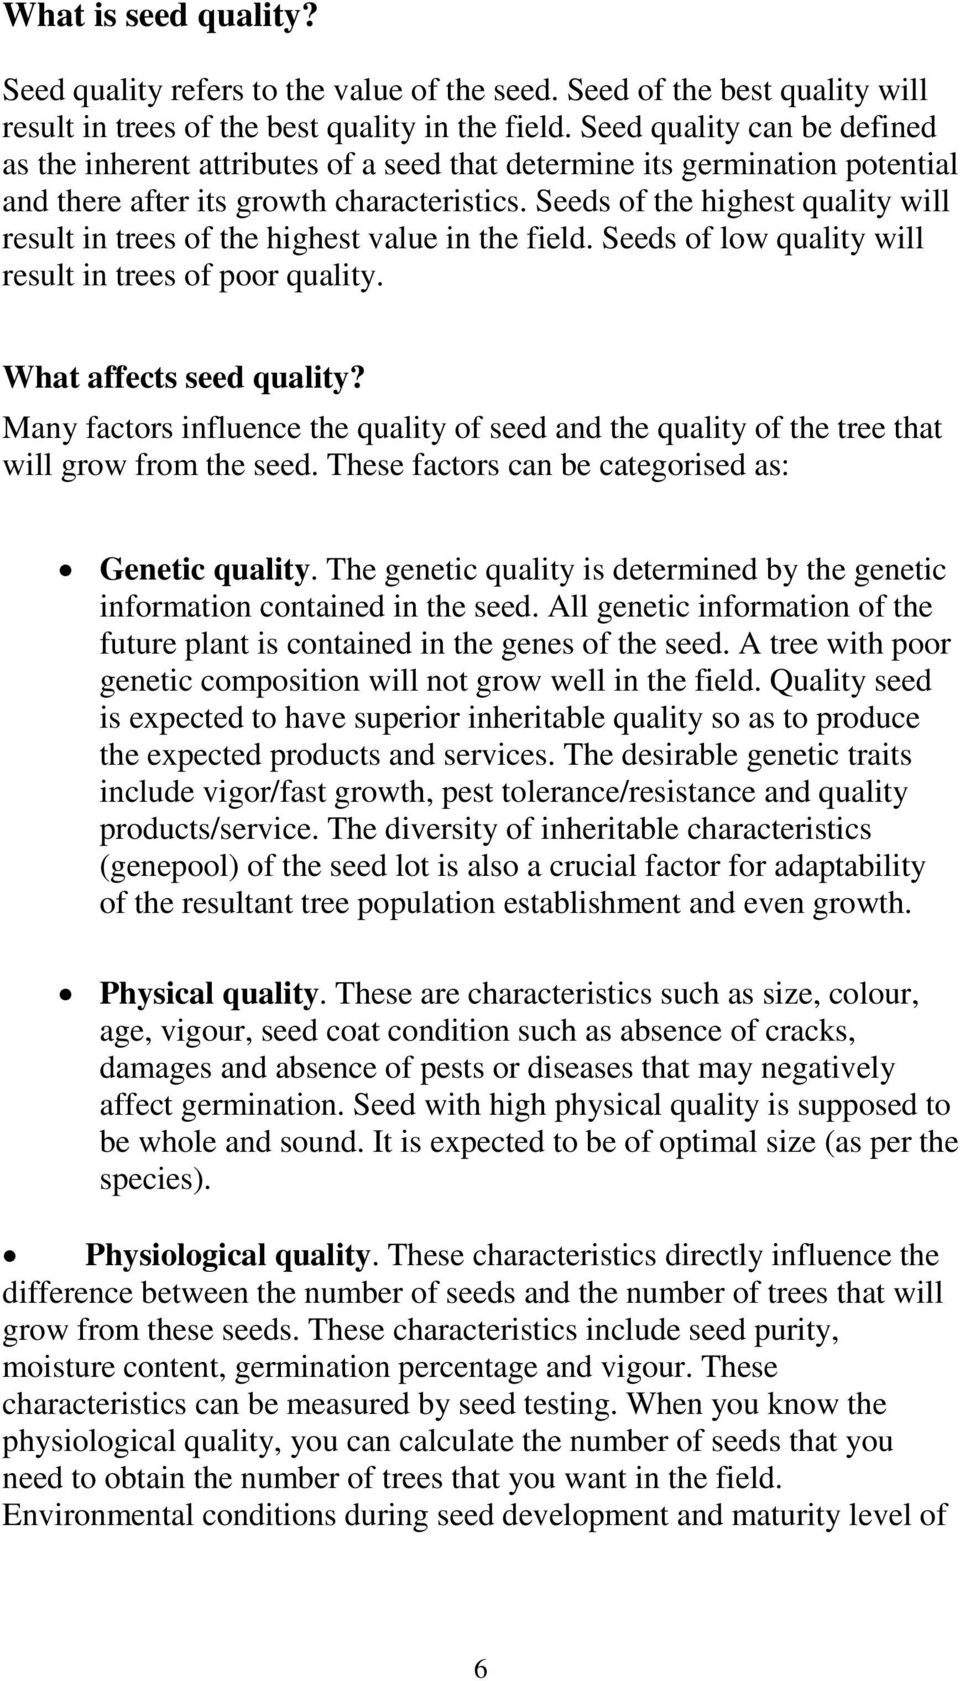 Seeds of the highest quality will result in trees of the highest value in the field. Seeds of low quality will result in trees of poor quality. What affects seed quality?